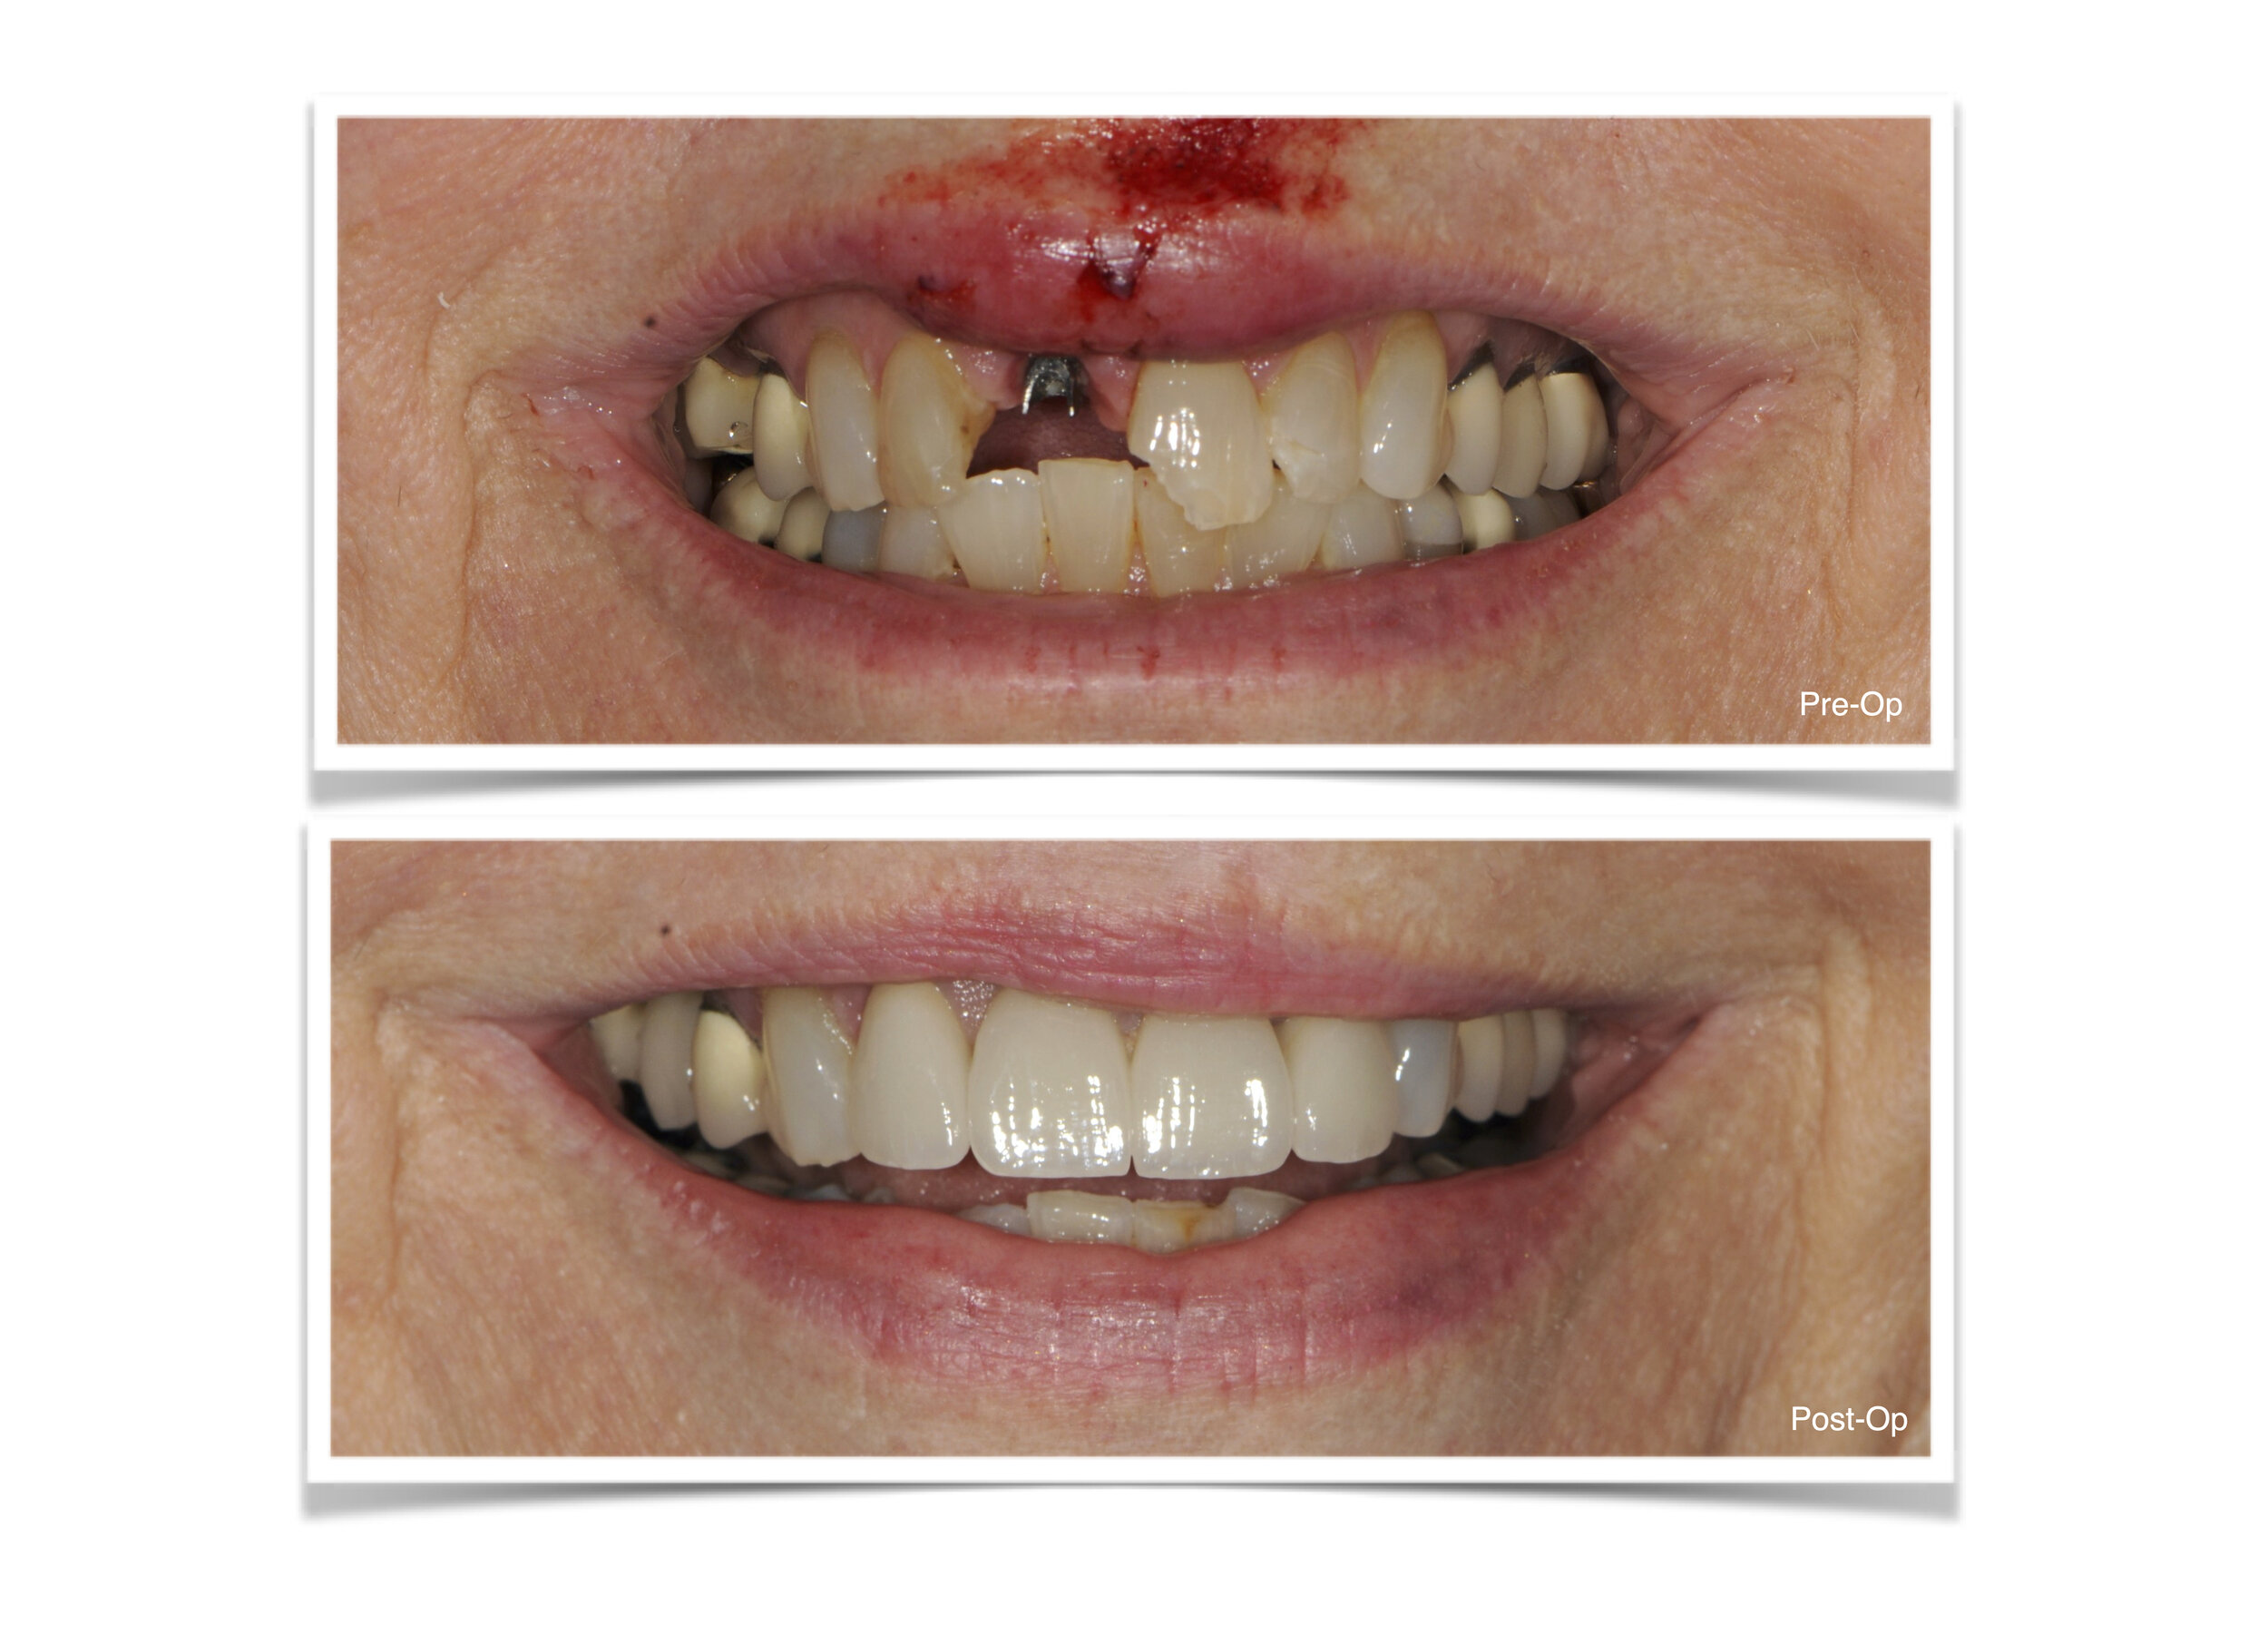 Dental Trauma - Implant Crowns and Traditional Crowns